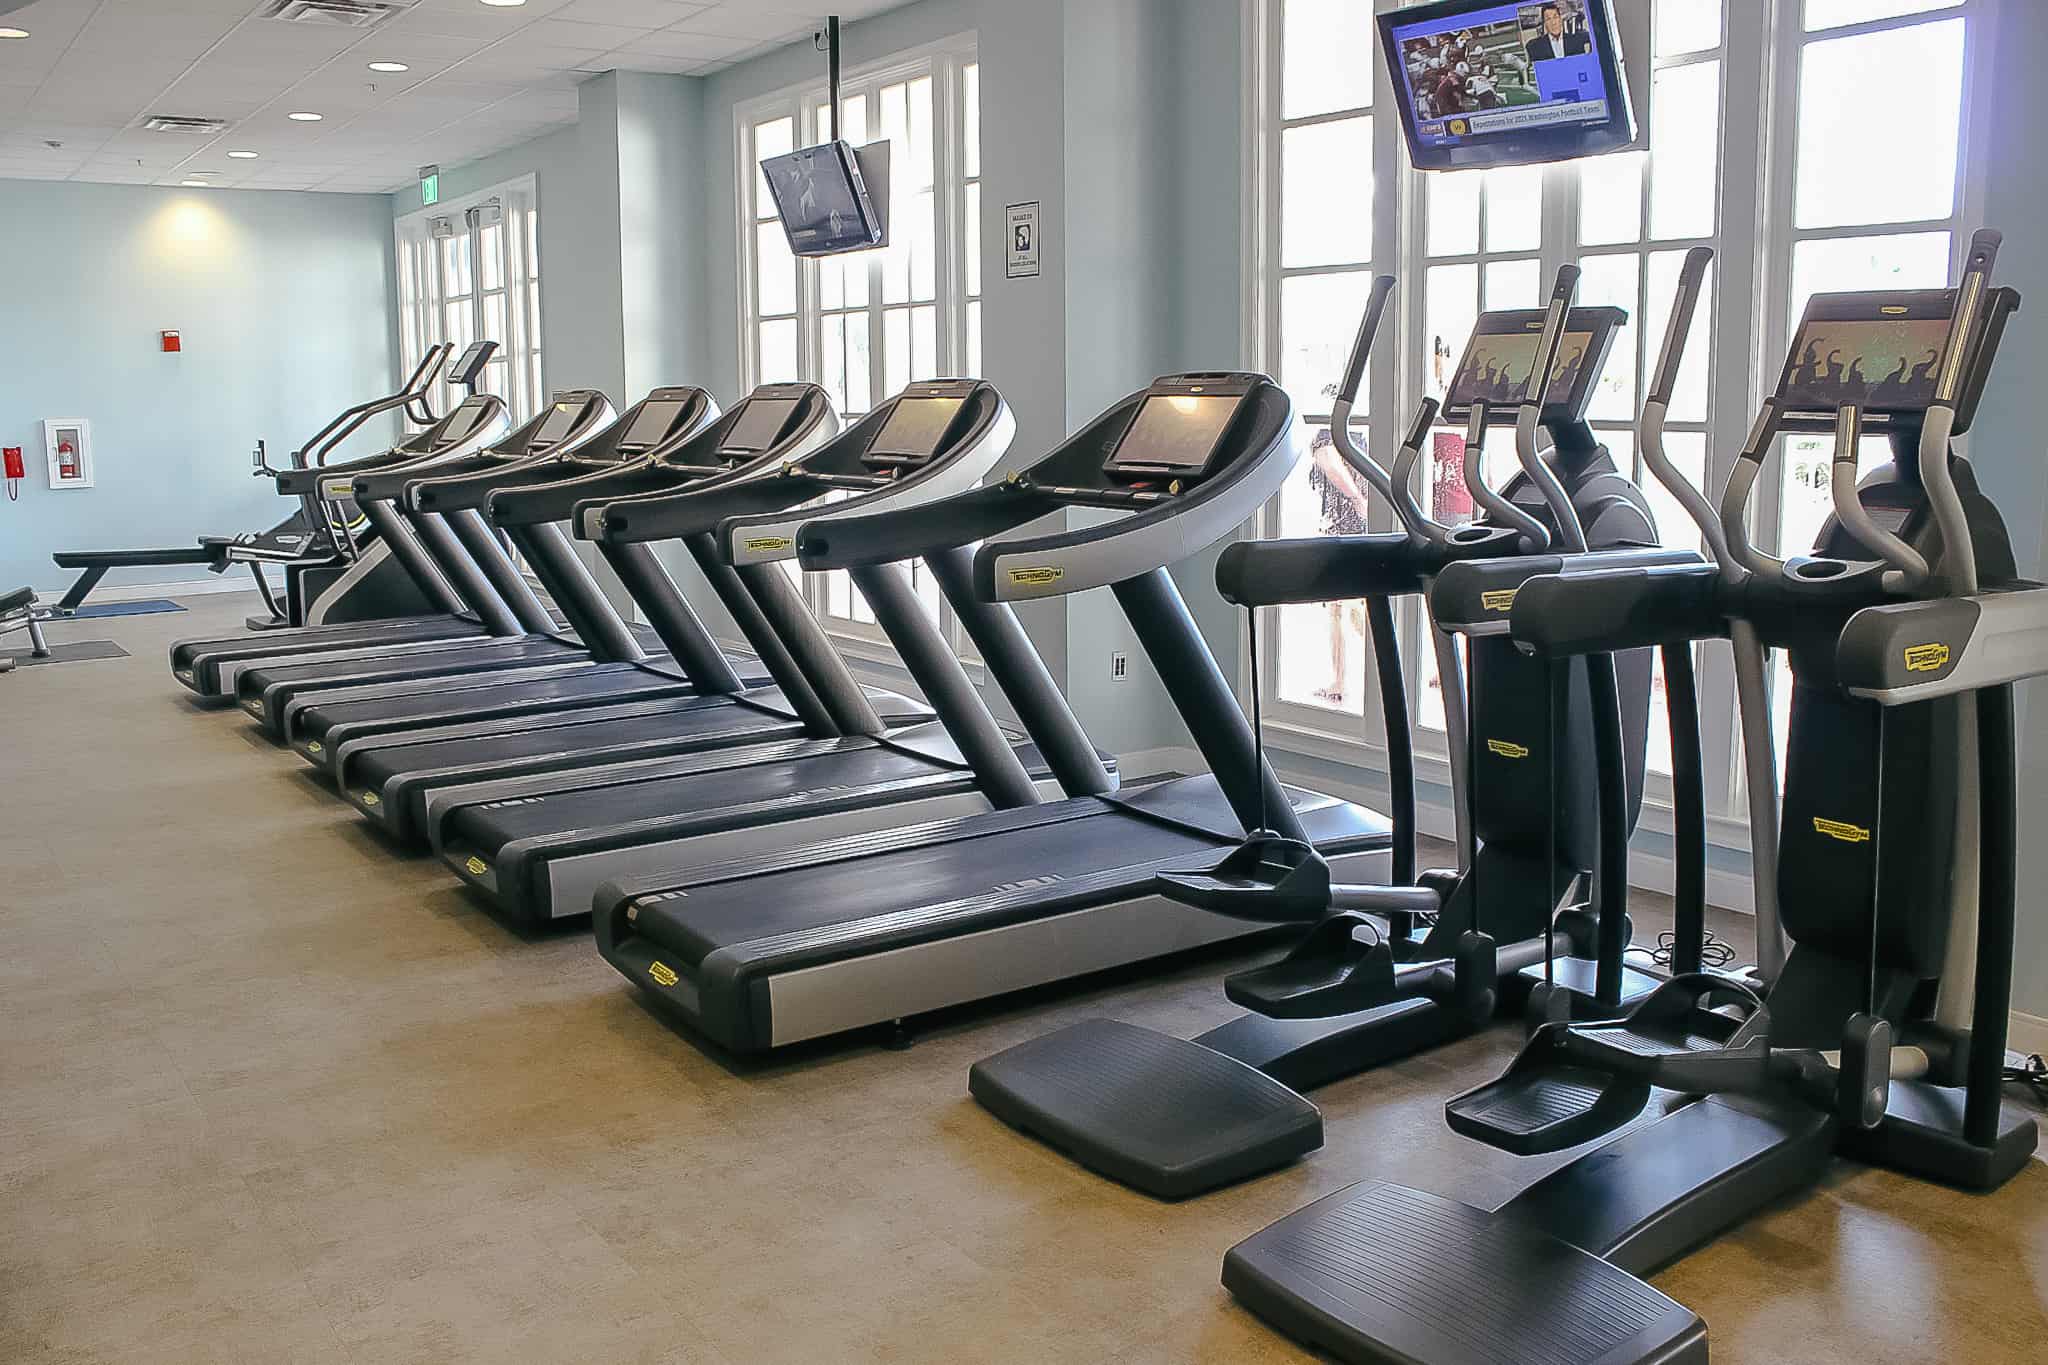 exercise equipment in a gym at Disney World Resort 